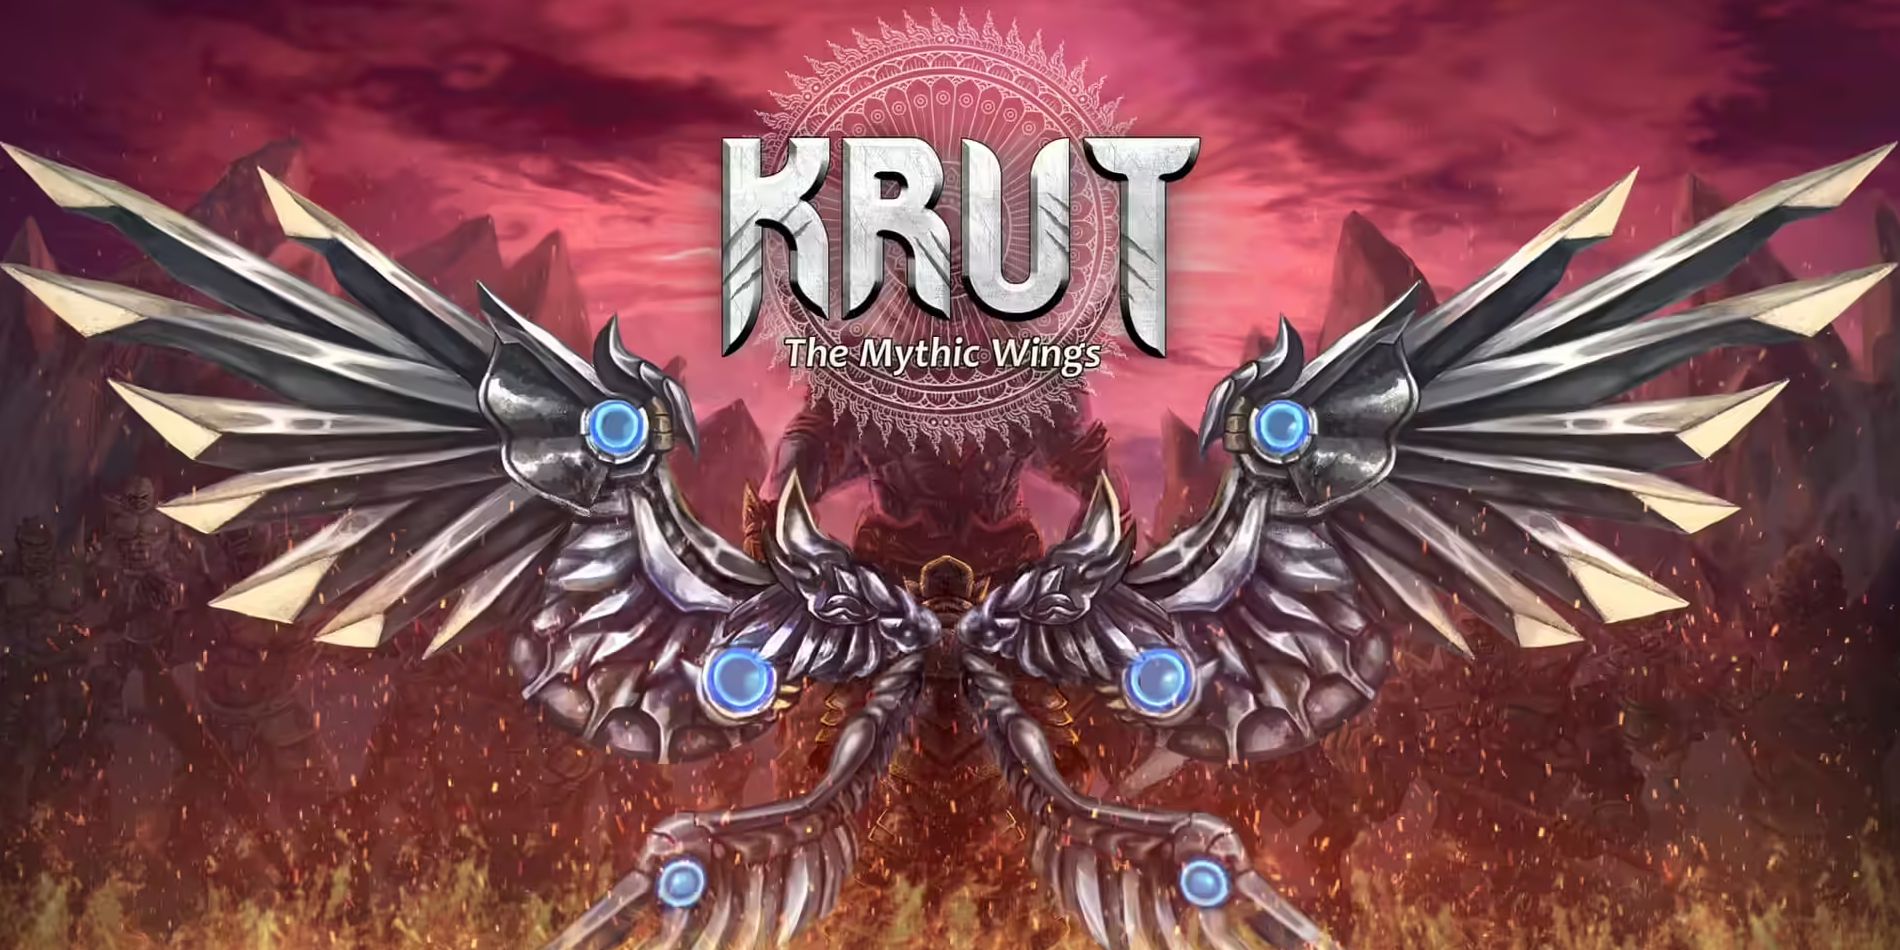 Krut The Mythic Wings Review Cover Art